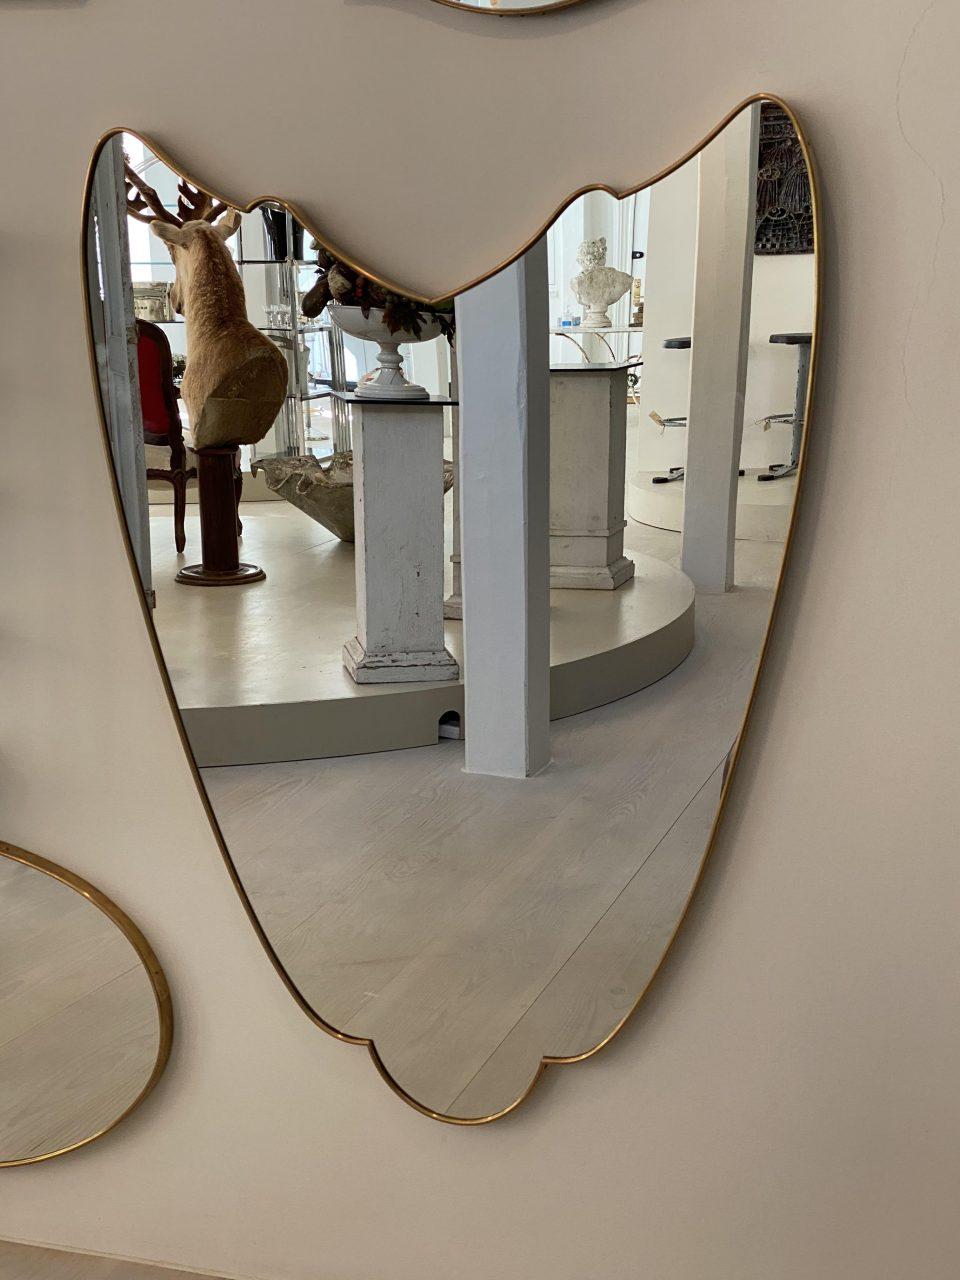 Smart and sleek and rarely found Italian brass mirror from the 1950s, with a slim frame and stunning eye catching free expression form. The mirror glass is original and the mirror is related stylistically to the midcentury designer Gio Ponti.

The